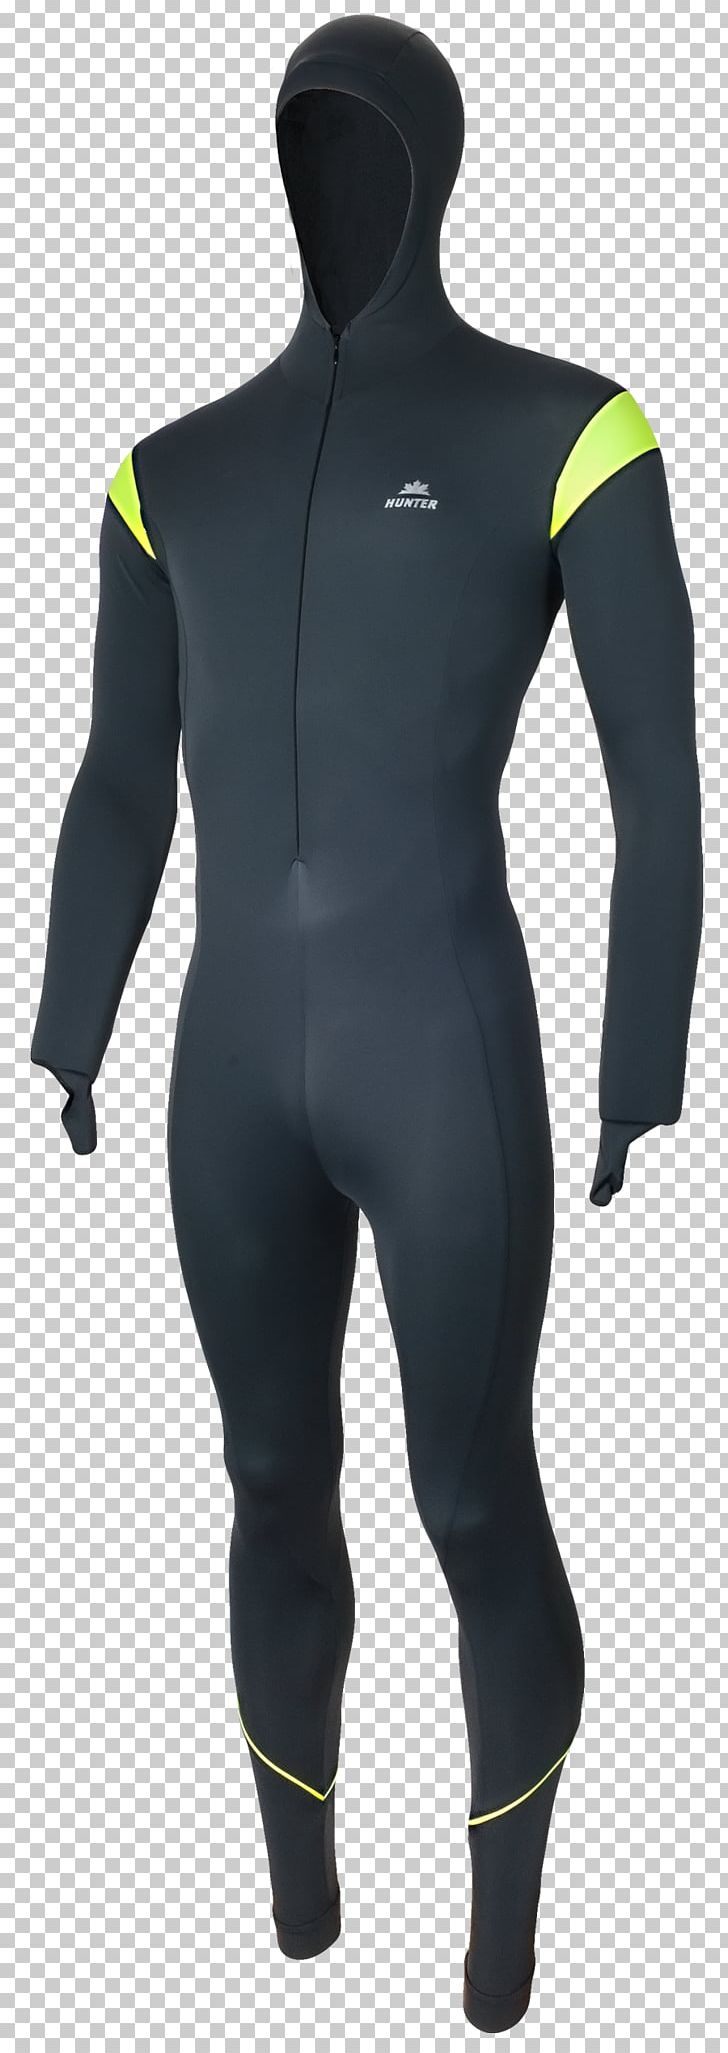 Wetsuit Ice Skating Clothing Sleeve Pants PNG, Clipart, Clothing, Diving Swimming Fins, Glove, Ice Skating, Jacket Free PNG Download